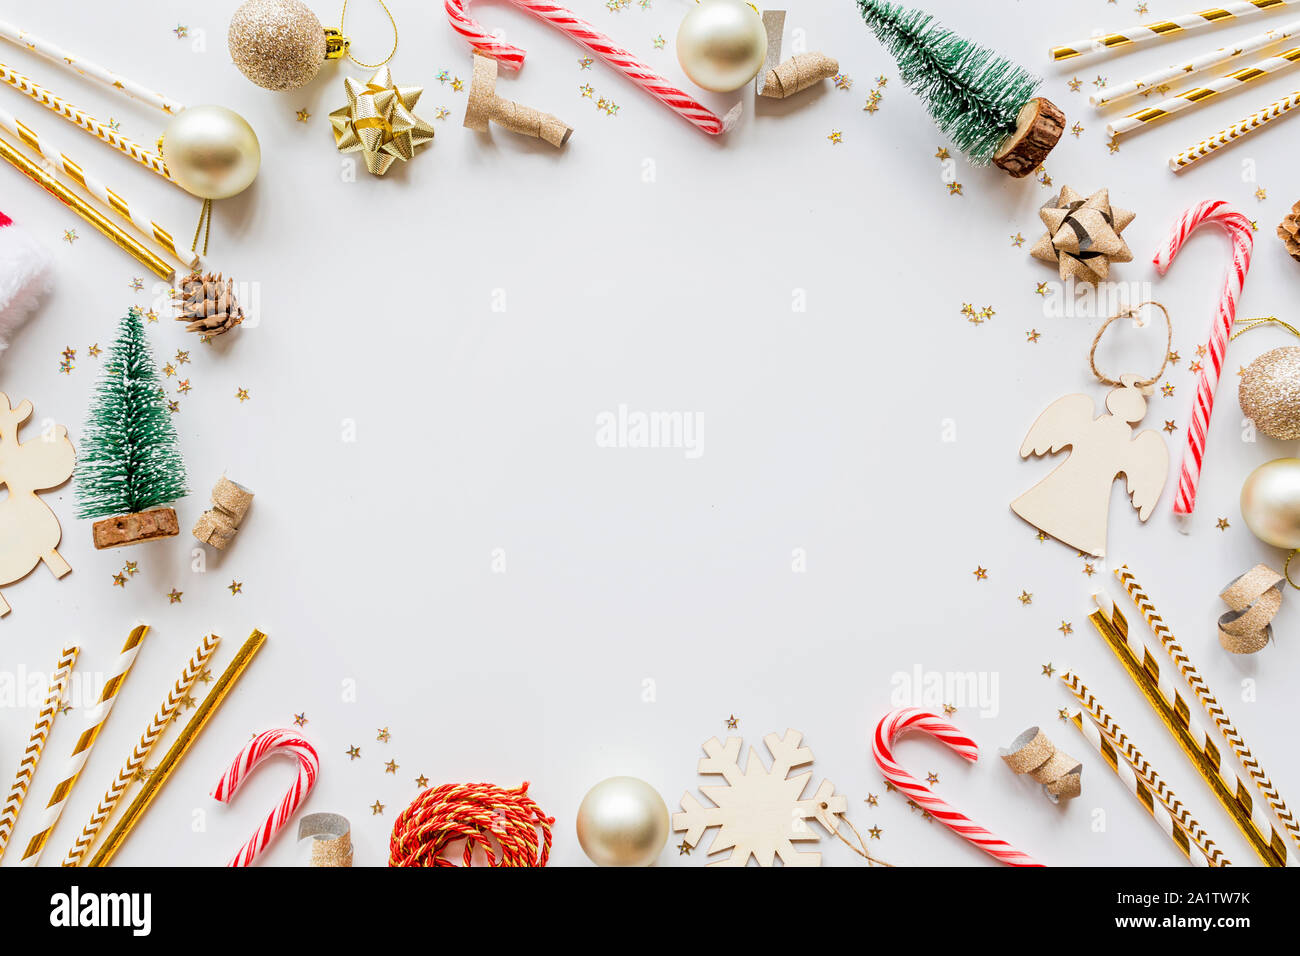 Christmas Composition With Toys And Accessories On White Background Greeting Card Winter Holidays Xmas Celebration Flat Lay Top View Mockup Stock Photo Alamy